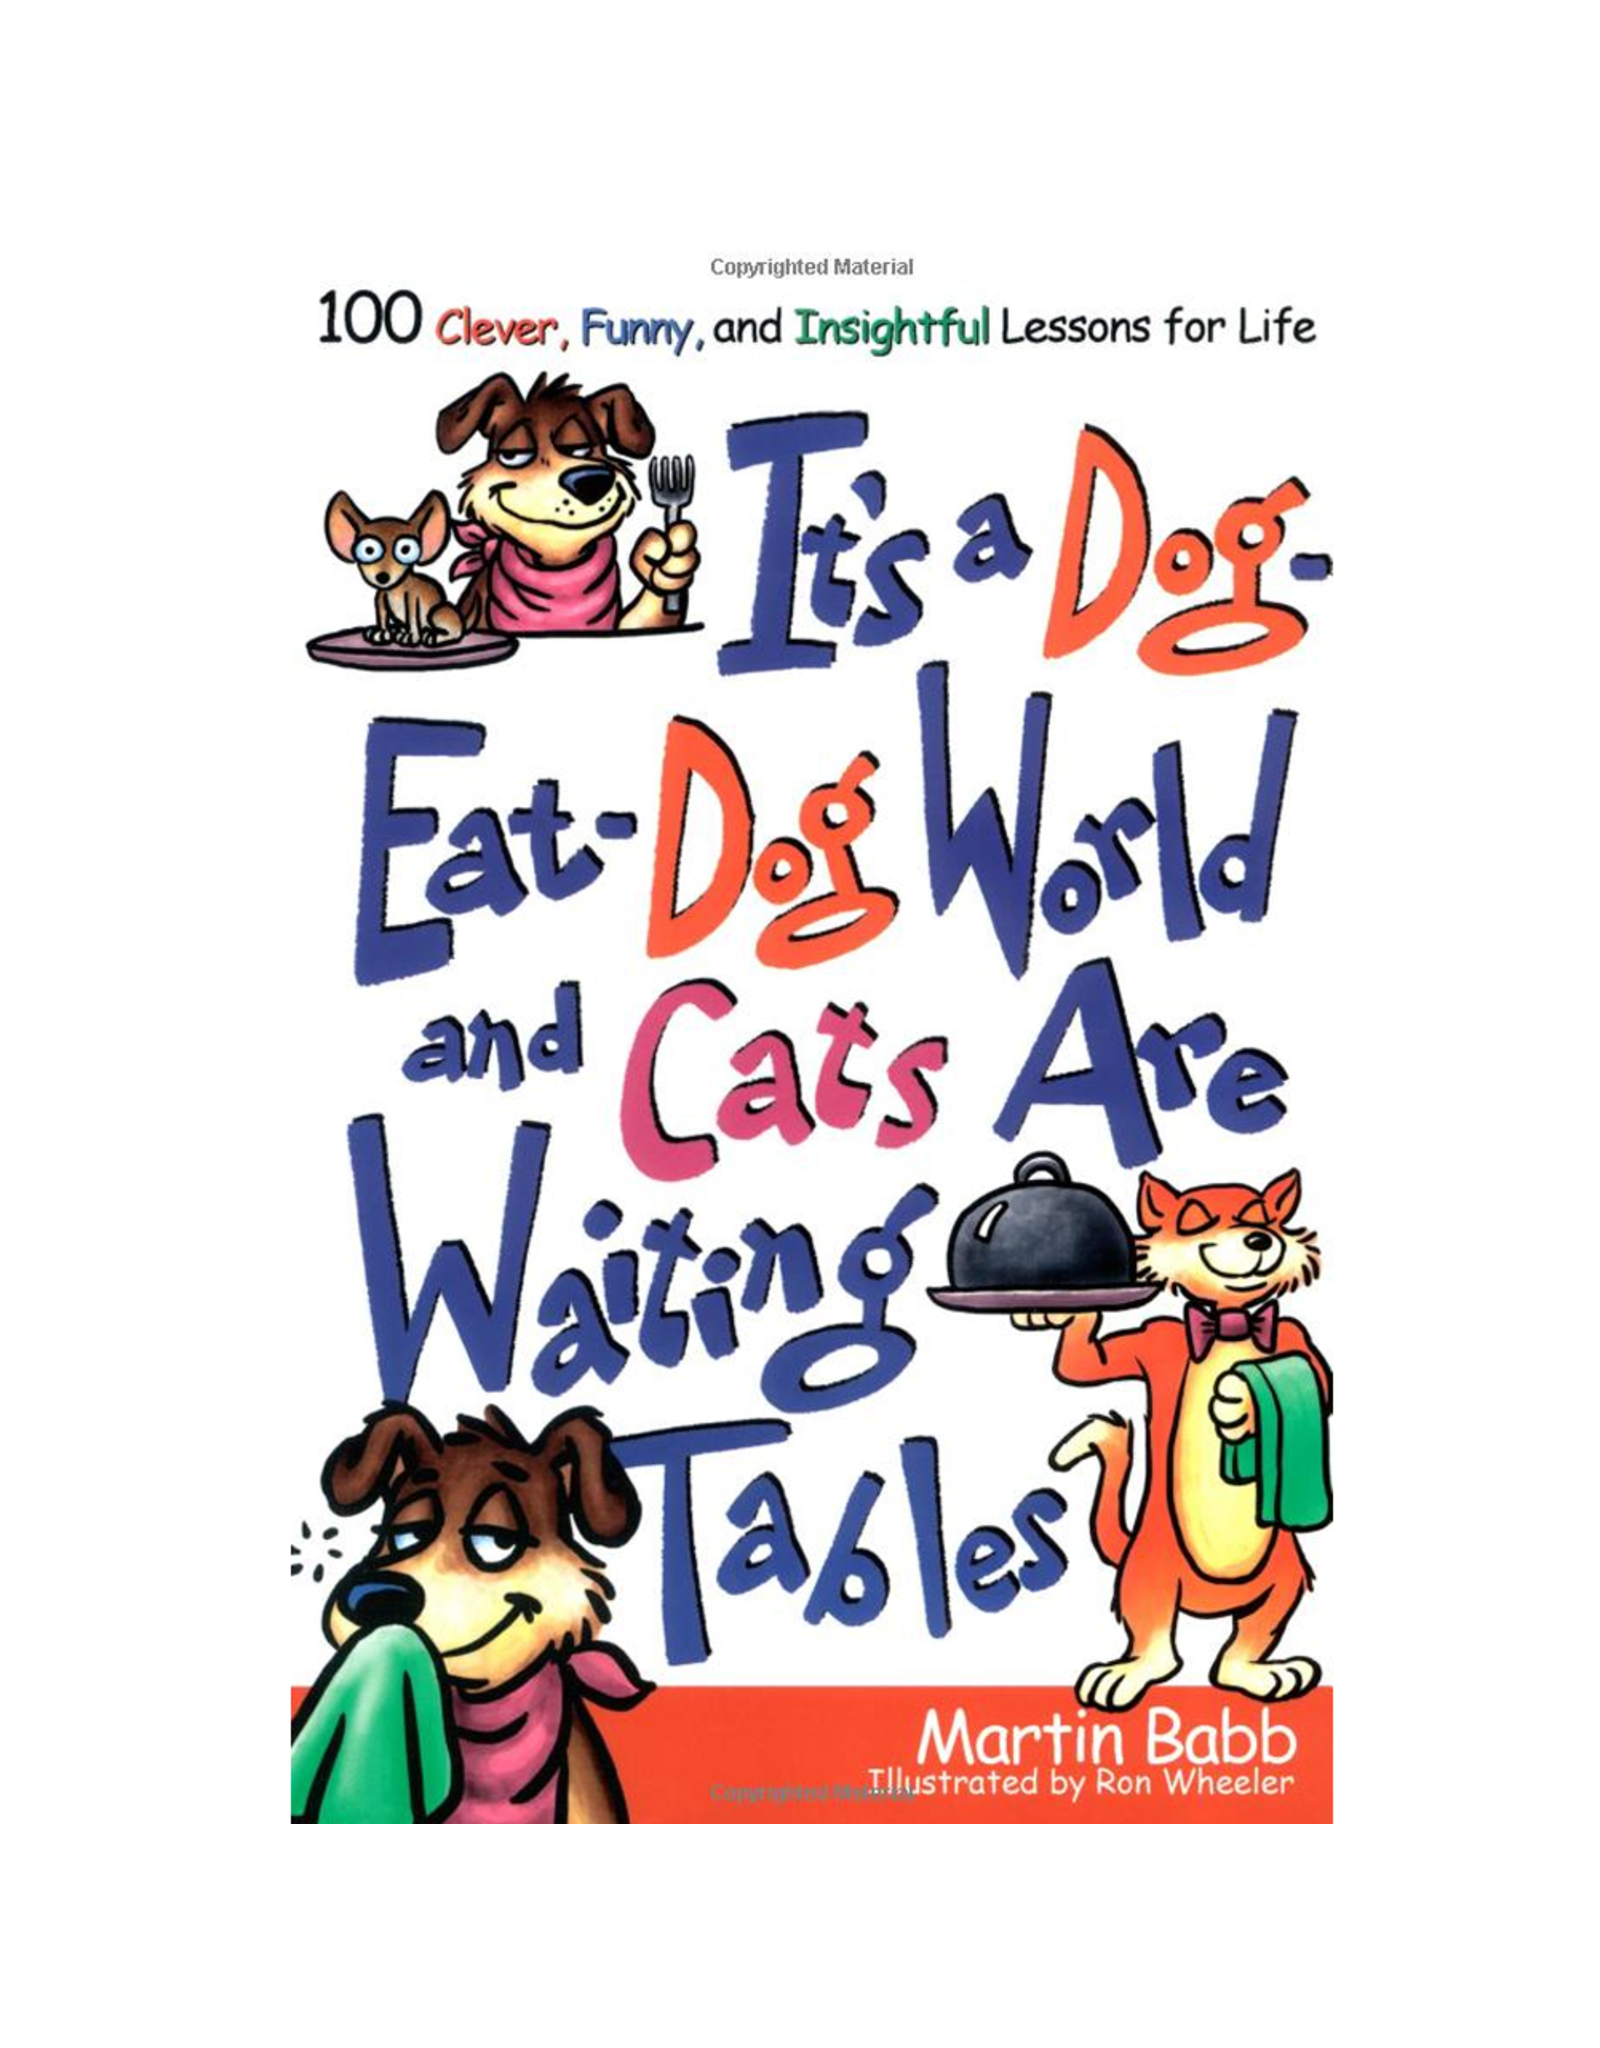 Simon and Schuster Its a Dog-Eat Dog World and Cats are Waiting Tables Lessons for Life